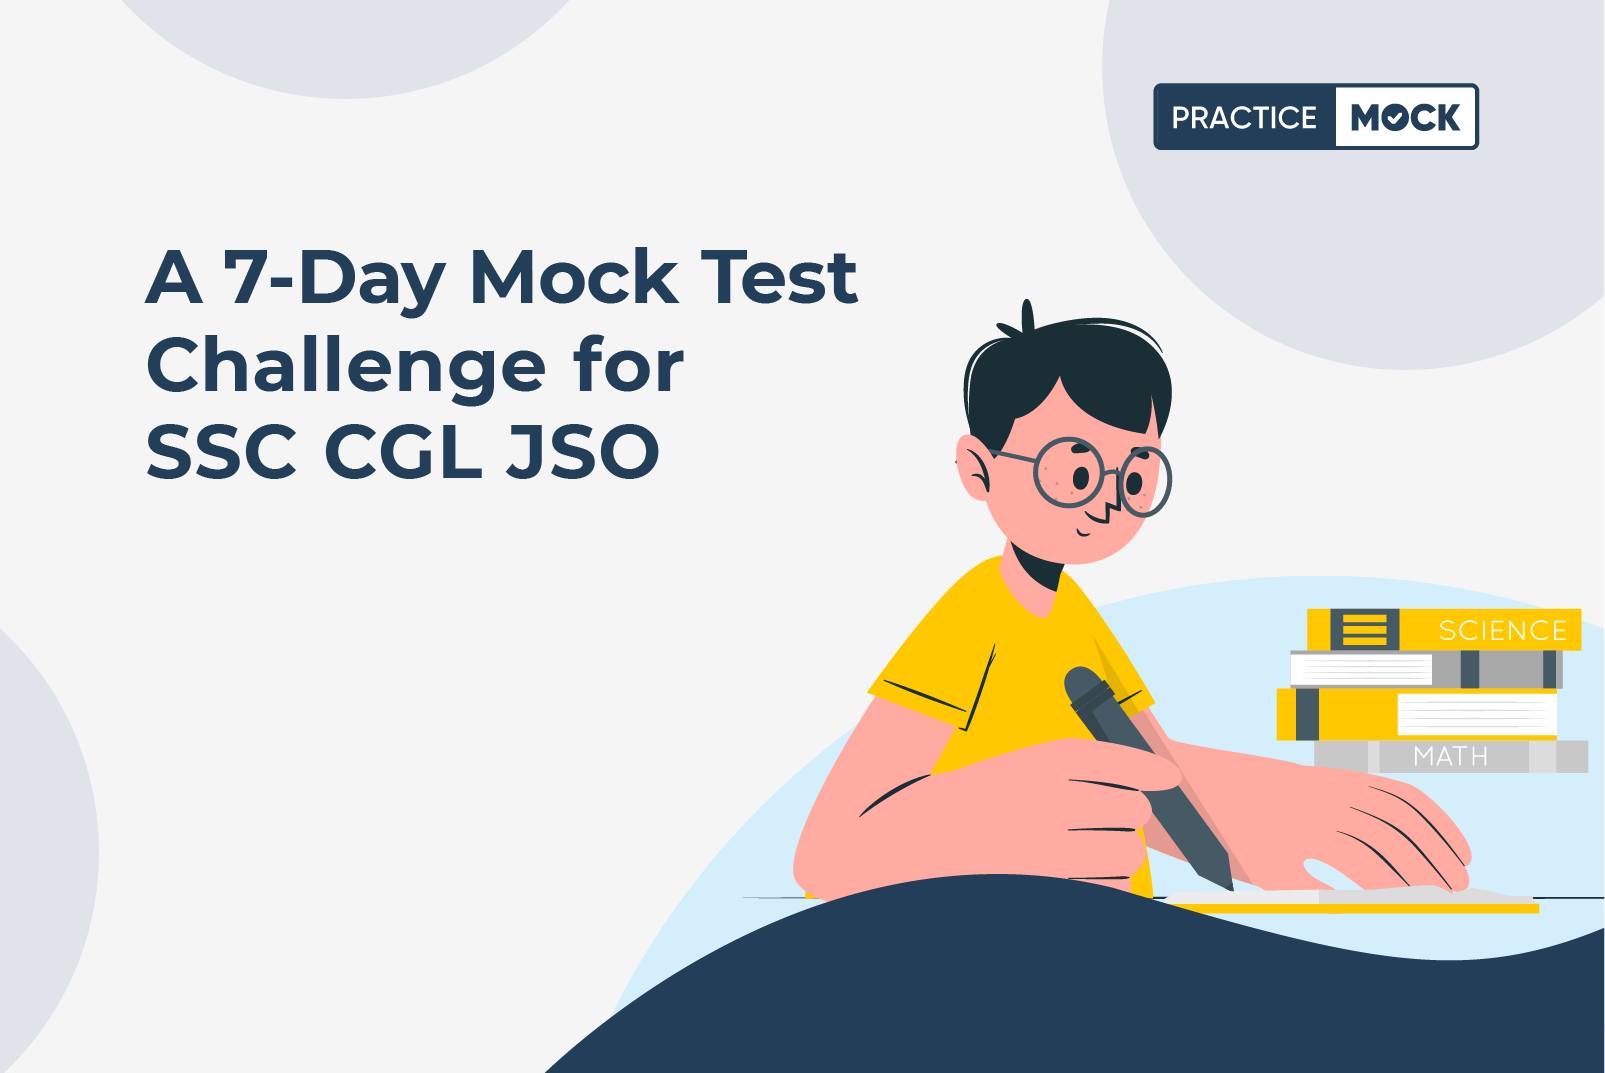 A 7-Day Mock Test Challenge for SSC CGL JSO